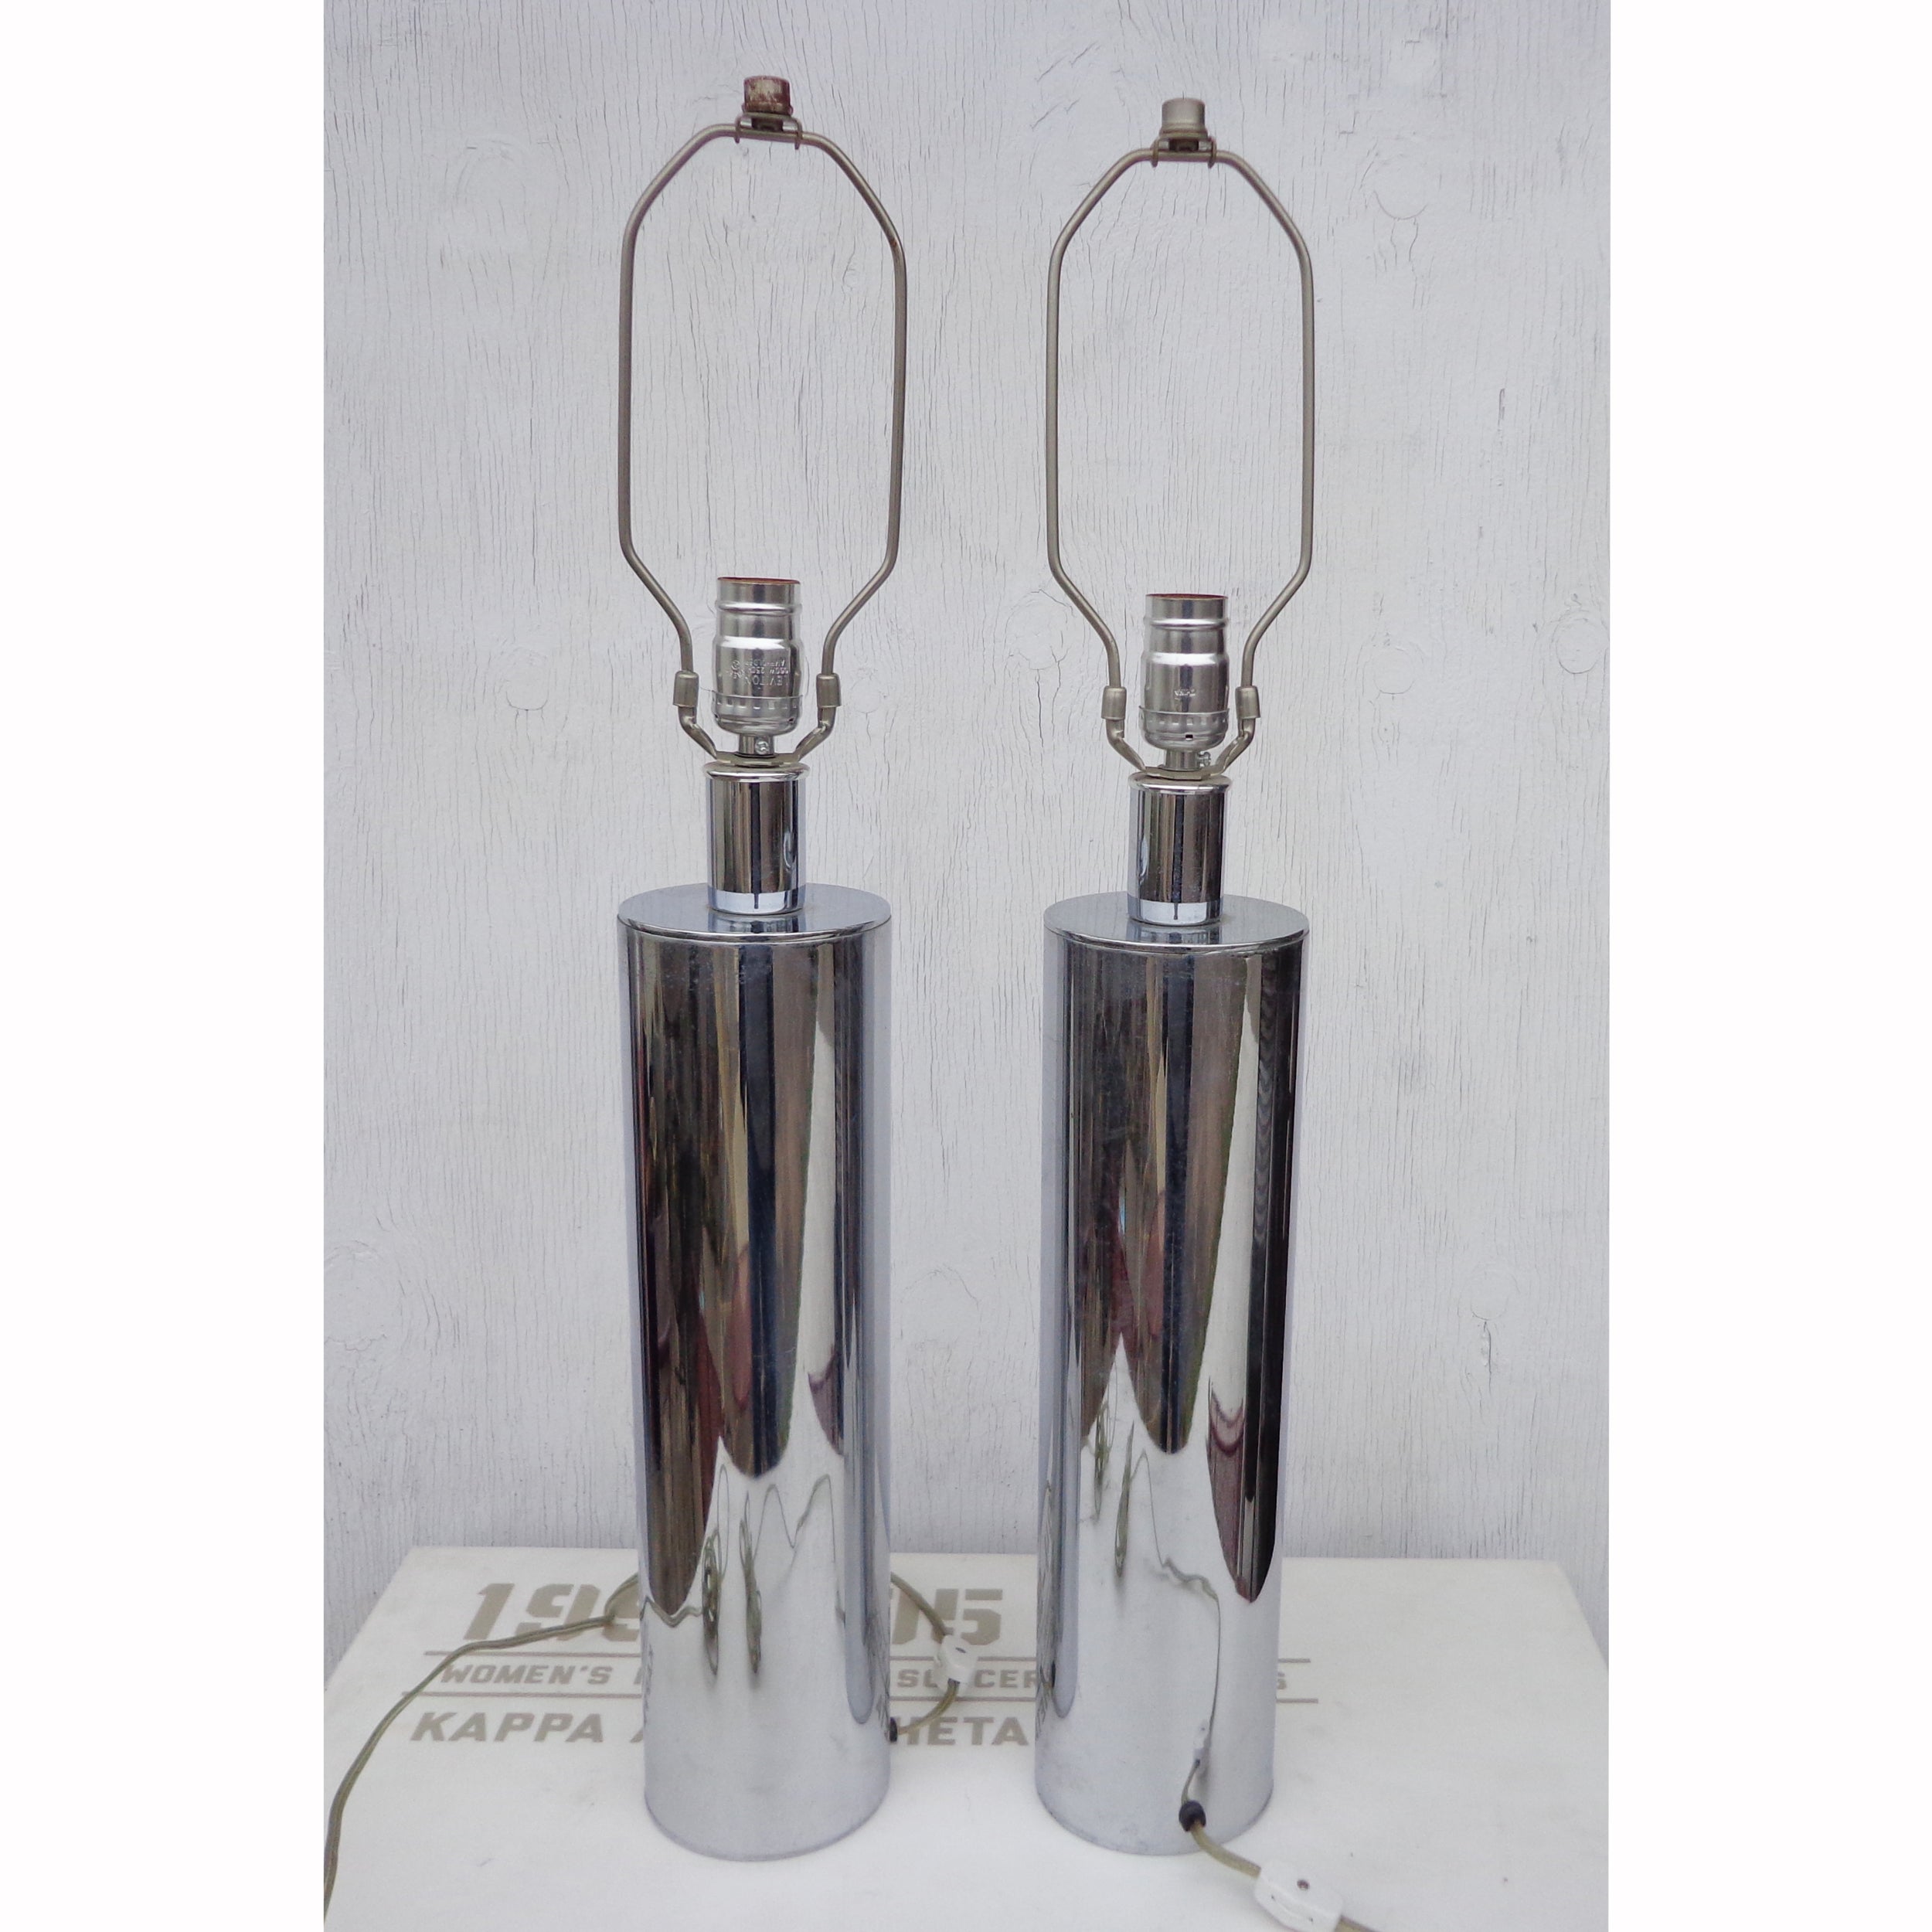 Pair Of George Kovacs chrome cylinder lamps

Pair of modern, minimal chrome lamps by George Kovacs, 1970s. Cylinder shaped, wired and working. Shades are not included. 

We have 1 set available.